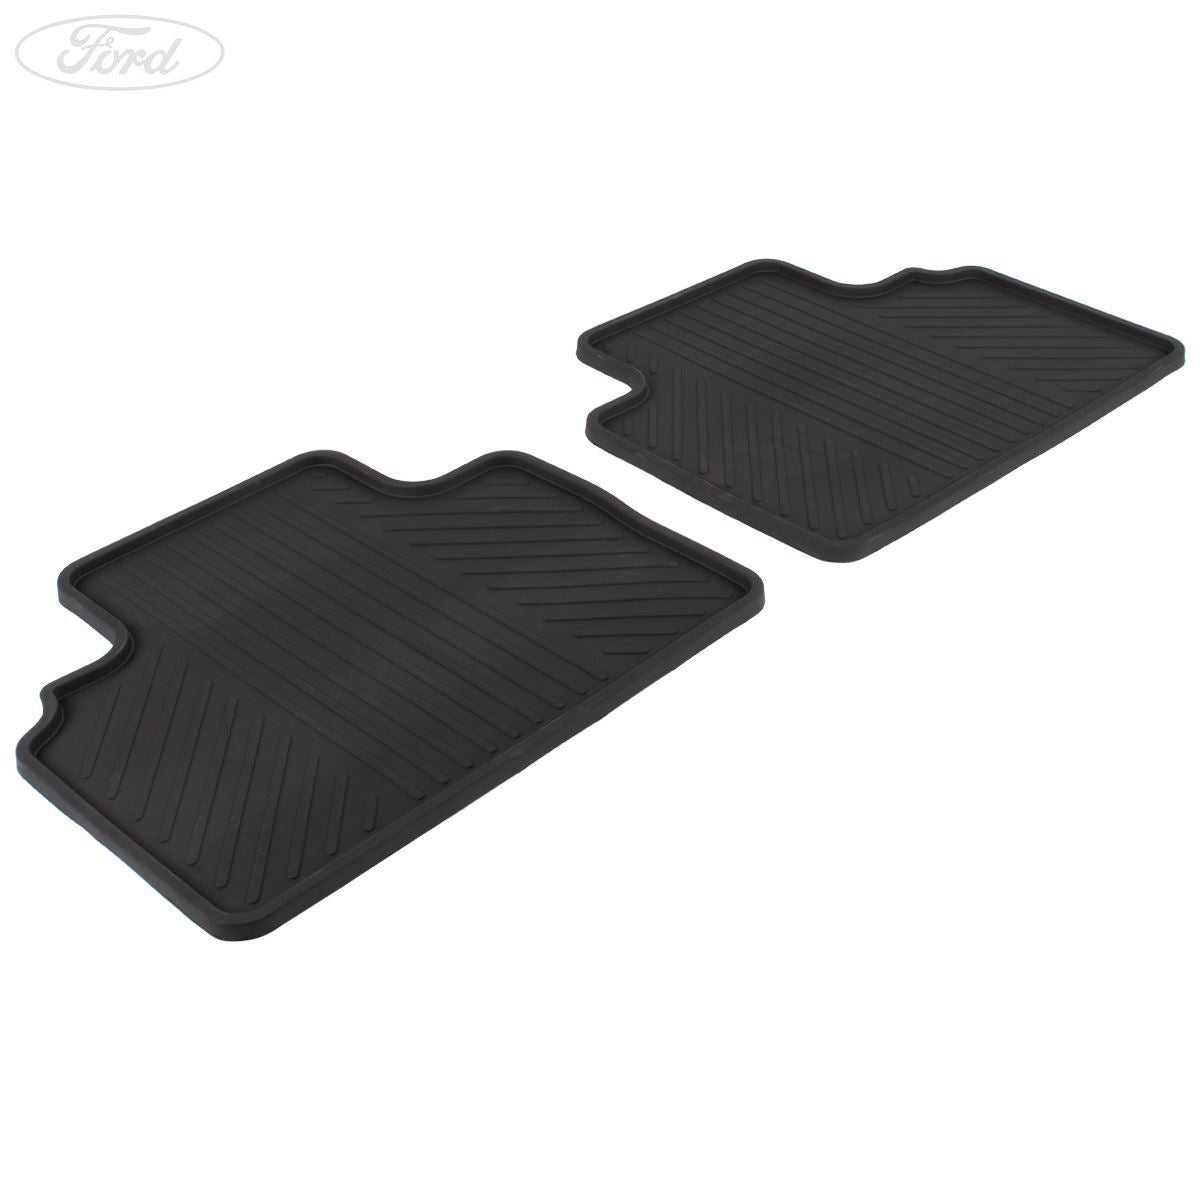 Ford, TRANSIT TOURNEO COURIER REAR RUBBER FLOOR MATS SET 2014